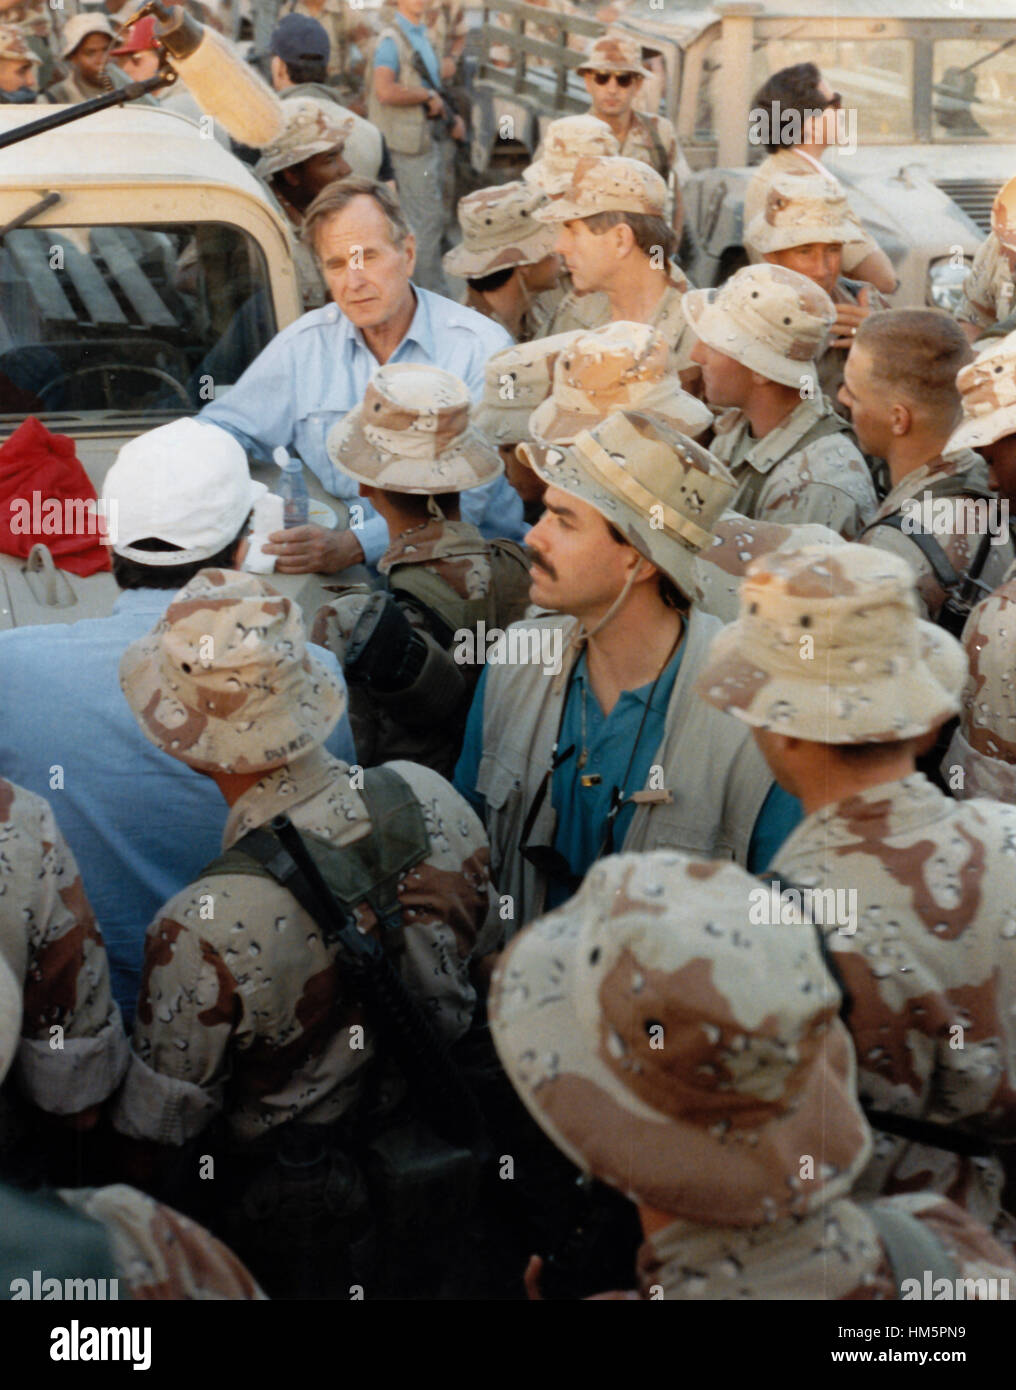 United States President George H.W. Bush shares a Thanksgiving holiday meal with US military personnel in Saudi Arabia on November 22, 1990. Mandatory Stock Photo